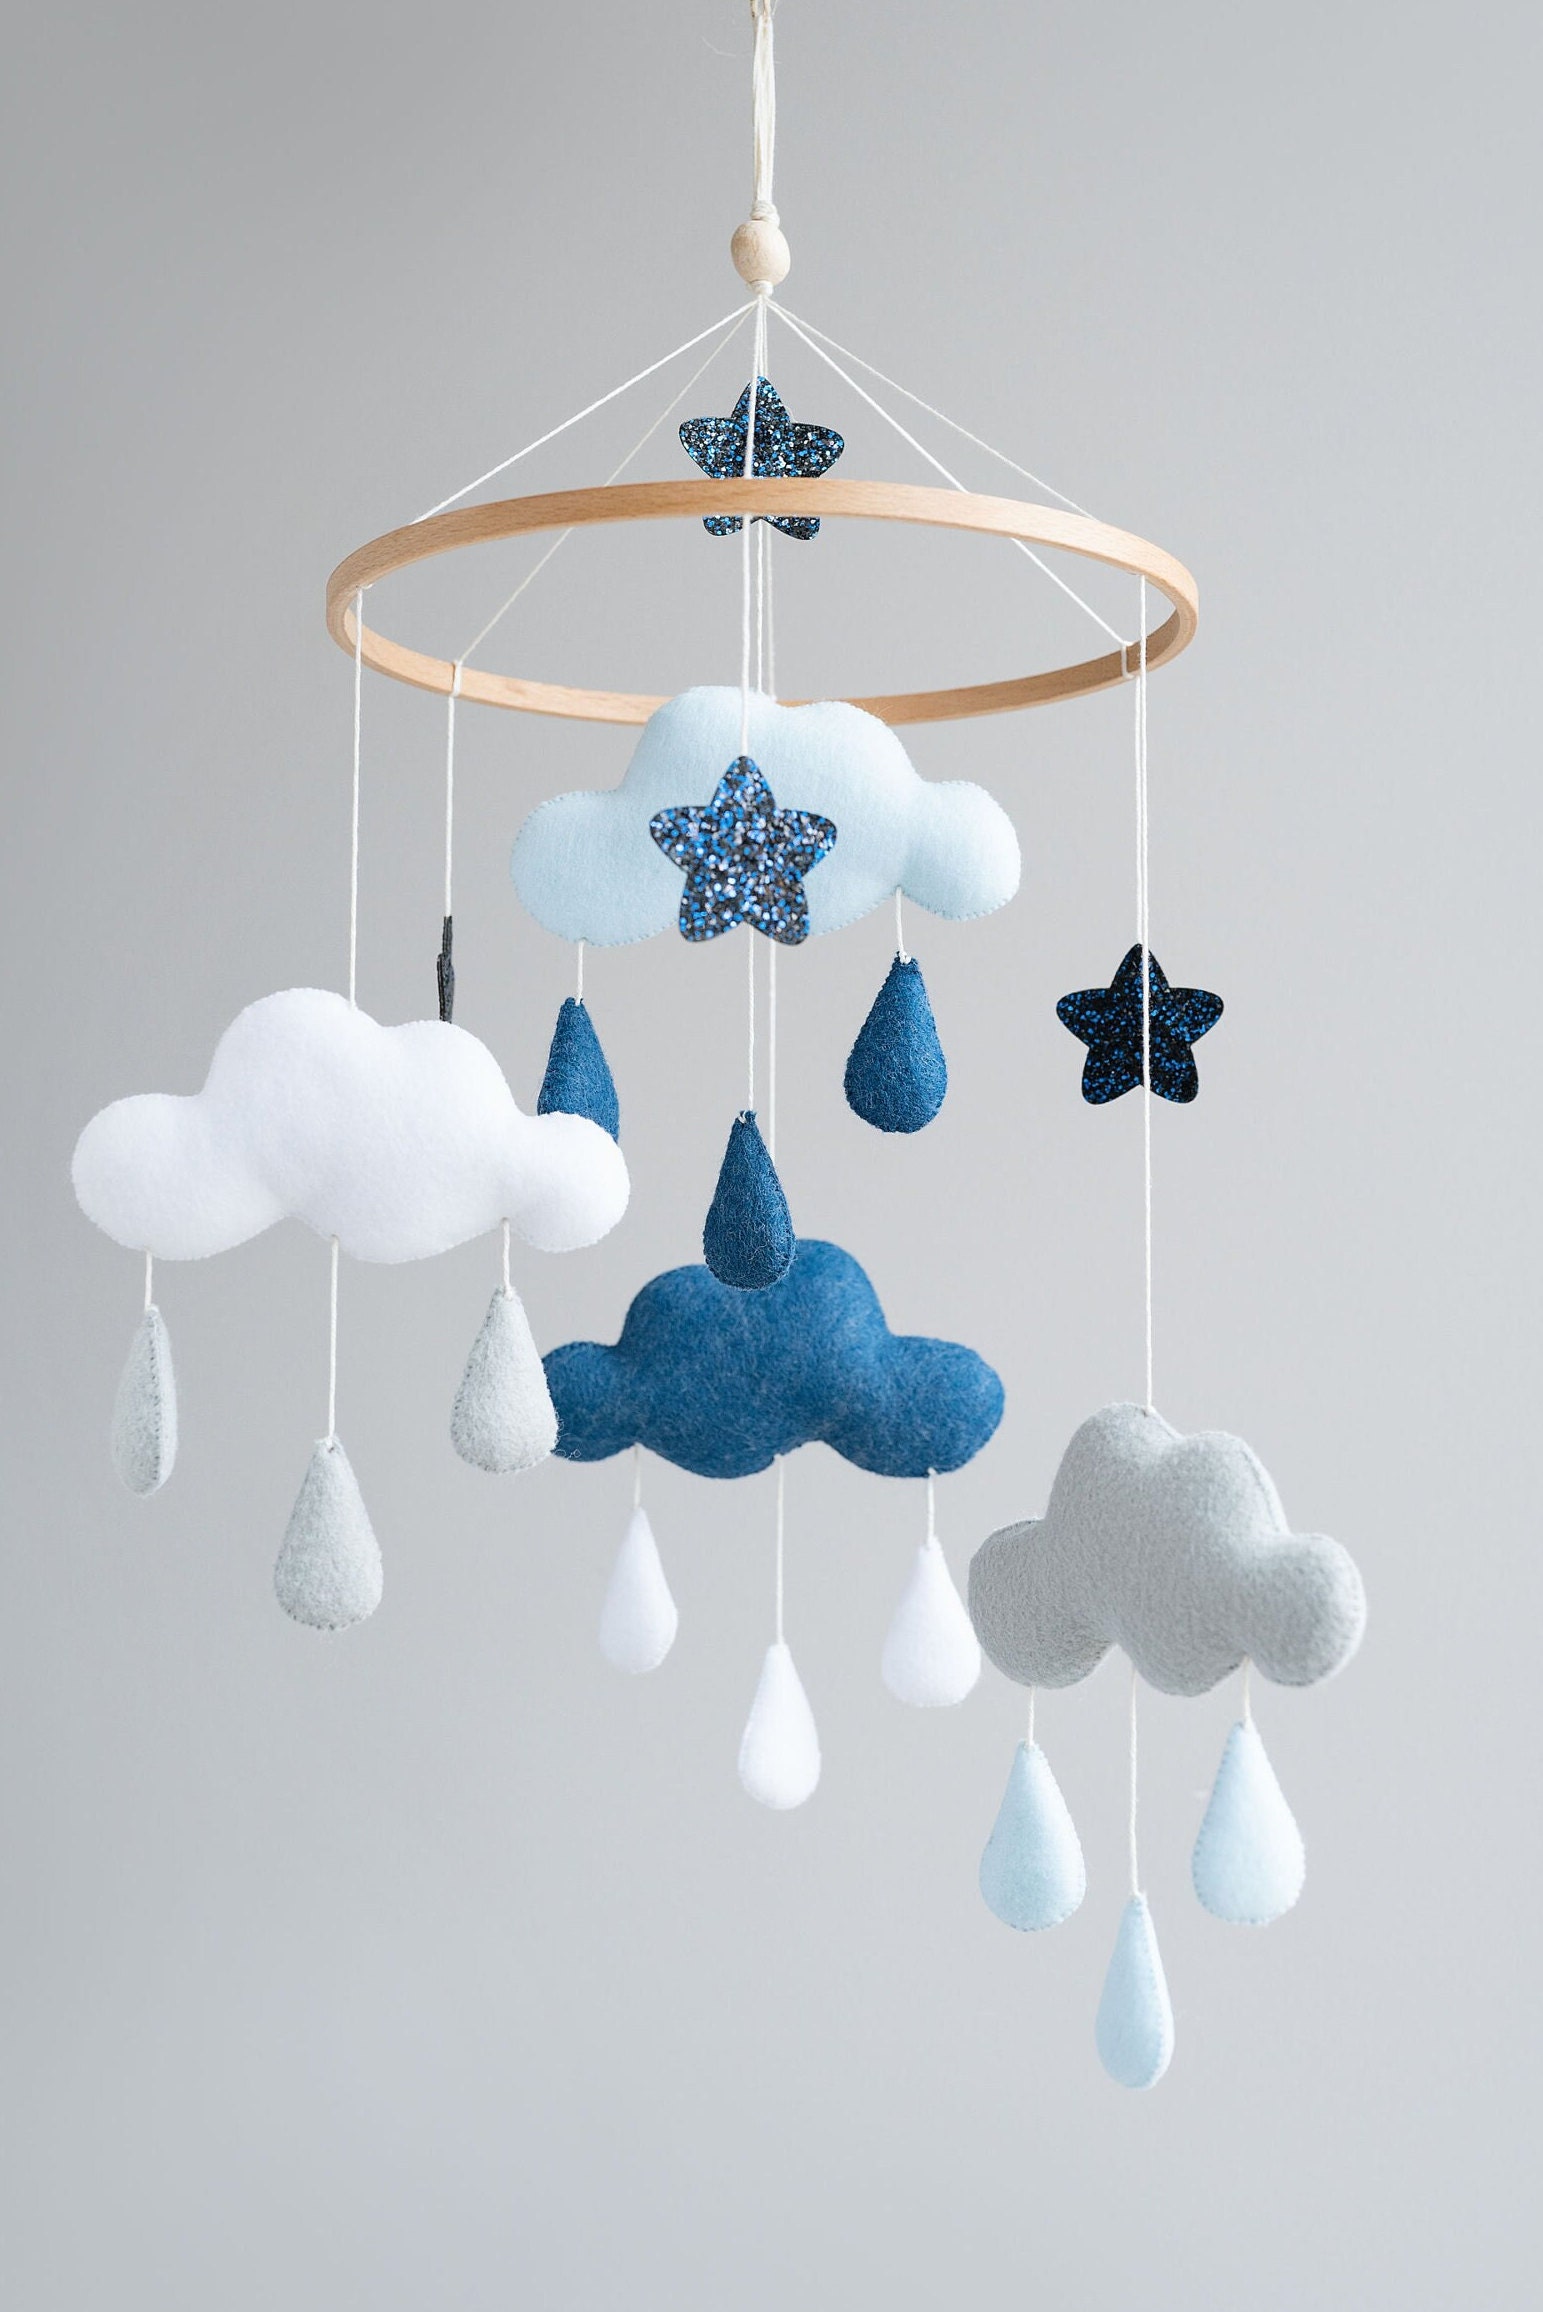 Cloud mobile baby mobile boy hanging clouds star crib | Etsy